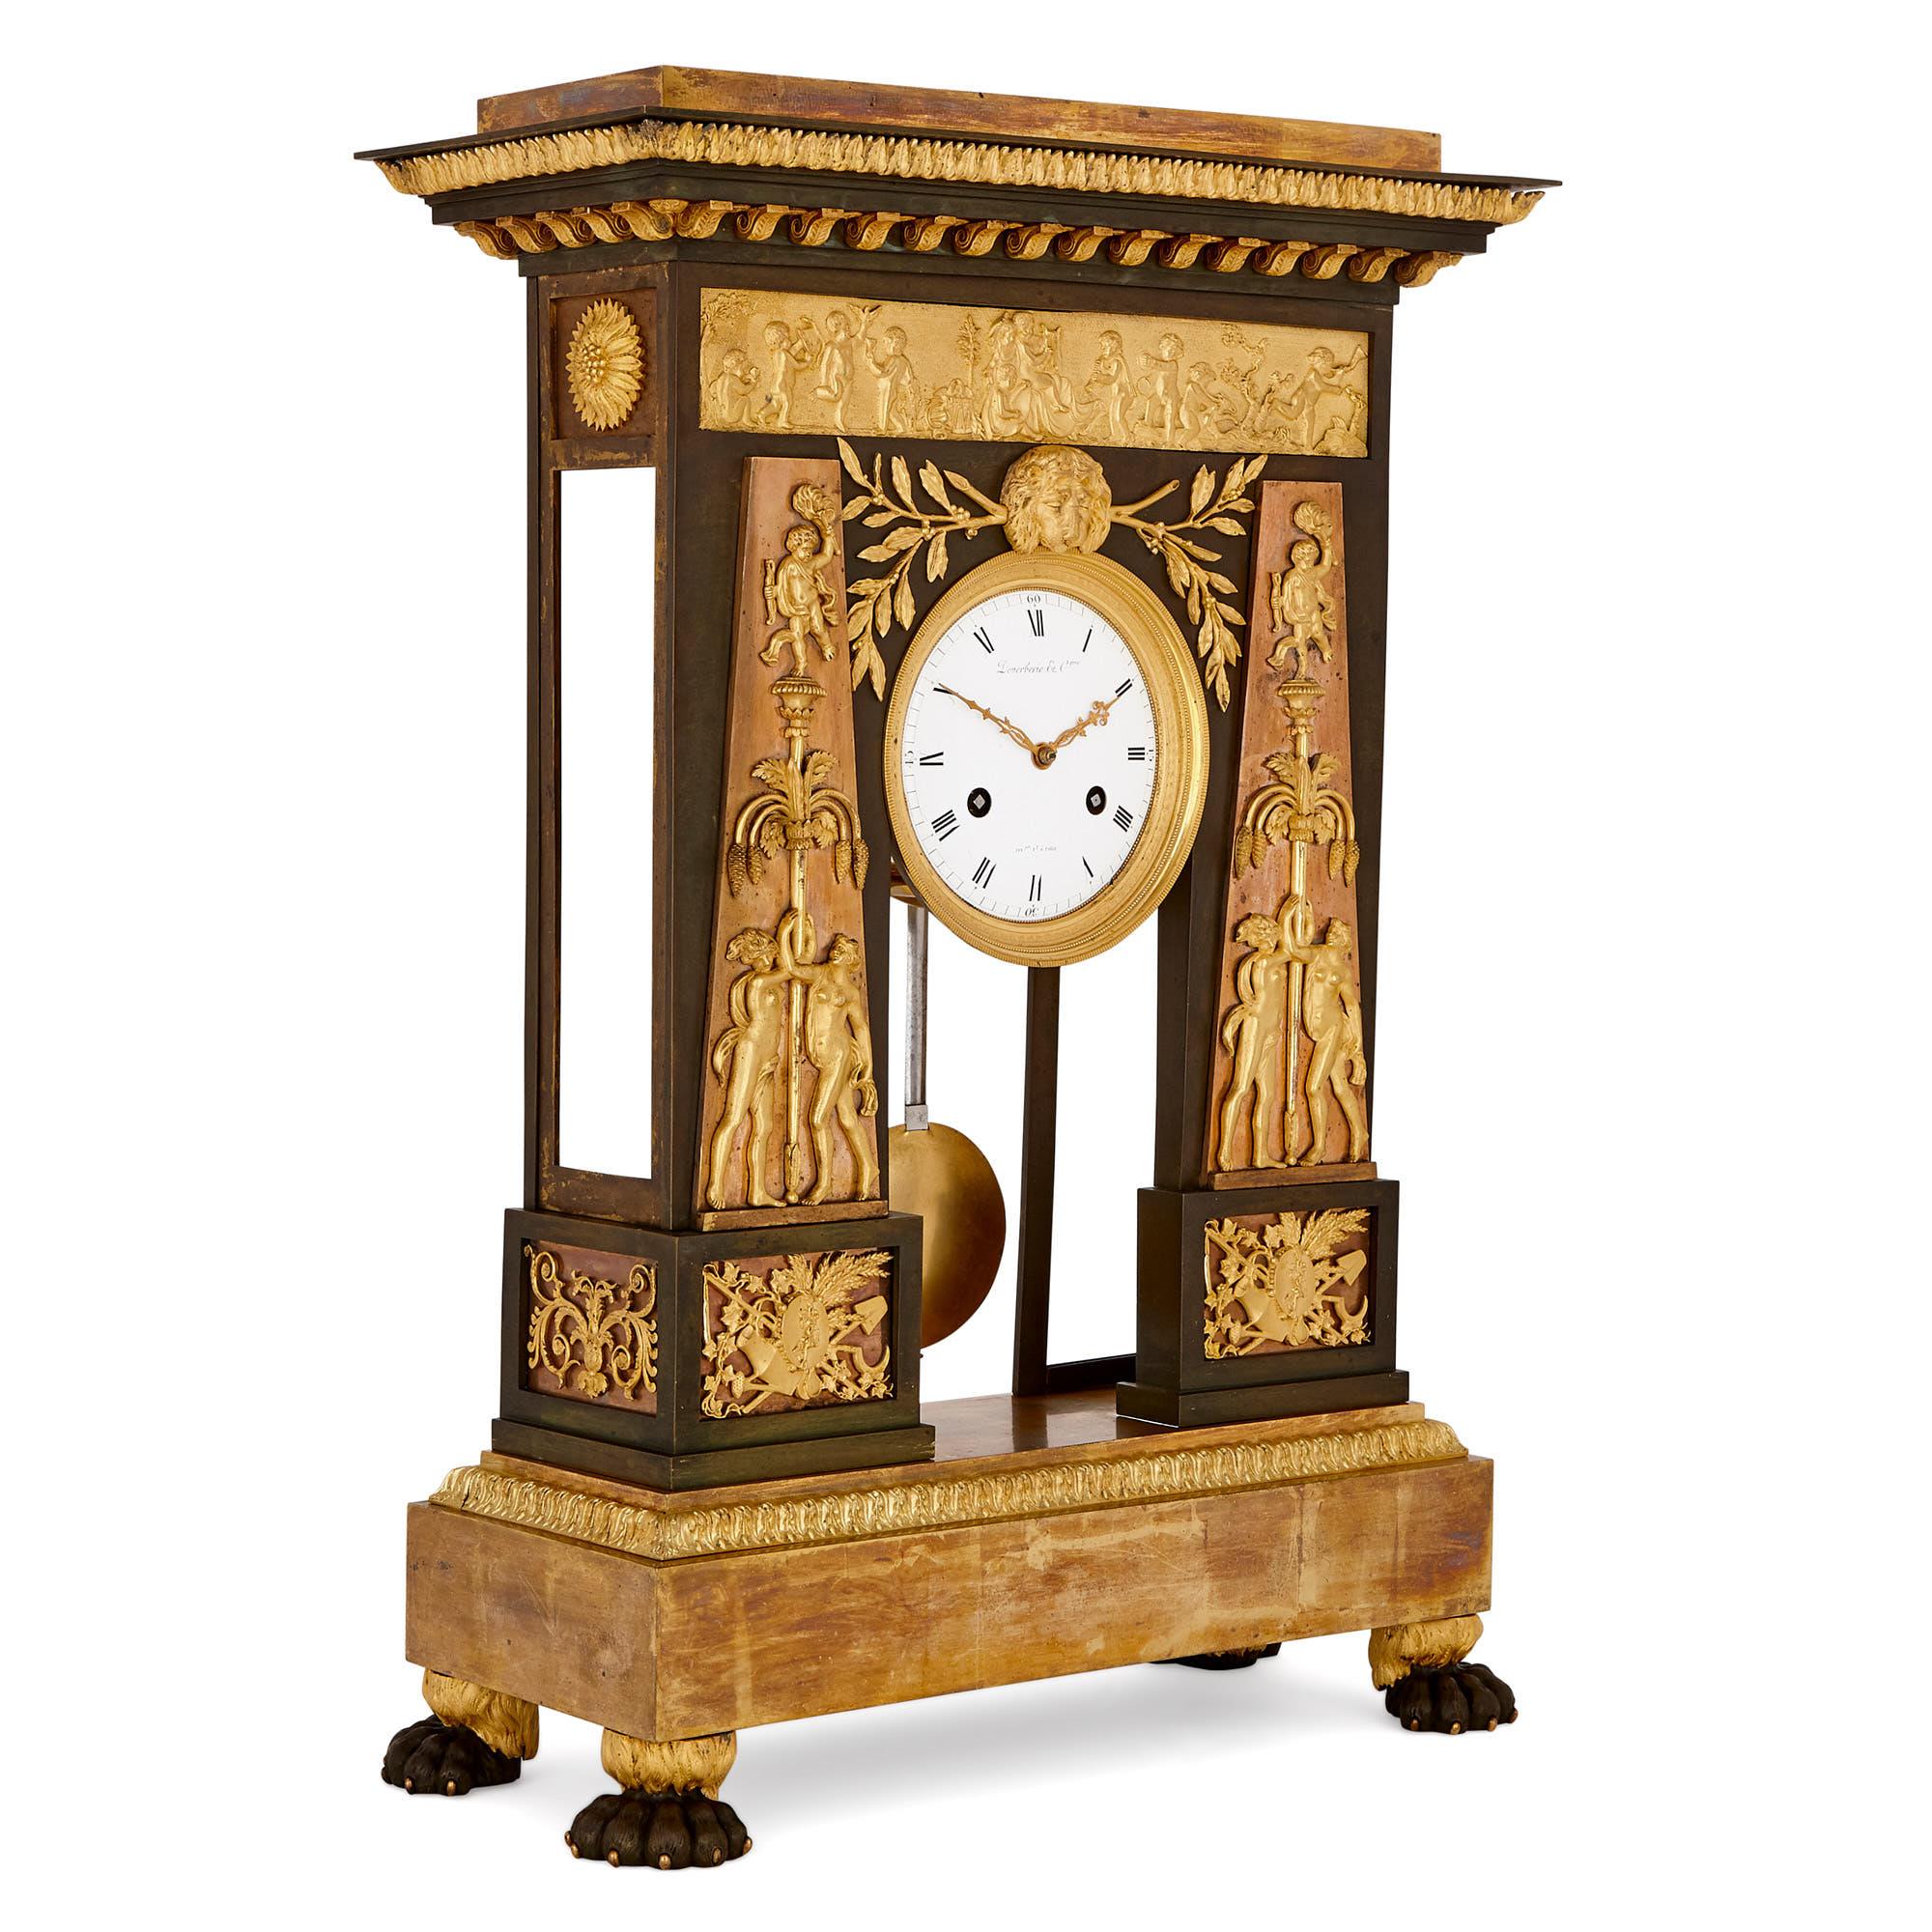 This magnificent Neoclassical style mantel clock was created by an important bronzier of the early 19th century, Jean-Simon Deverberie. The clock dates from circa 1805 when Napoleon I was Emperor of France. 

The patinated bronze clock is designed